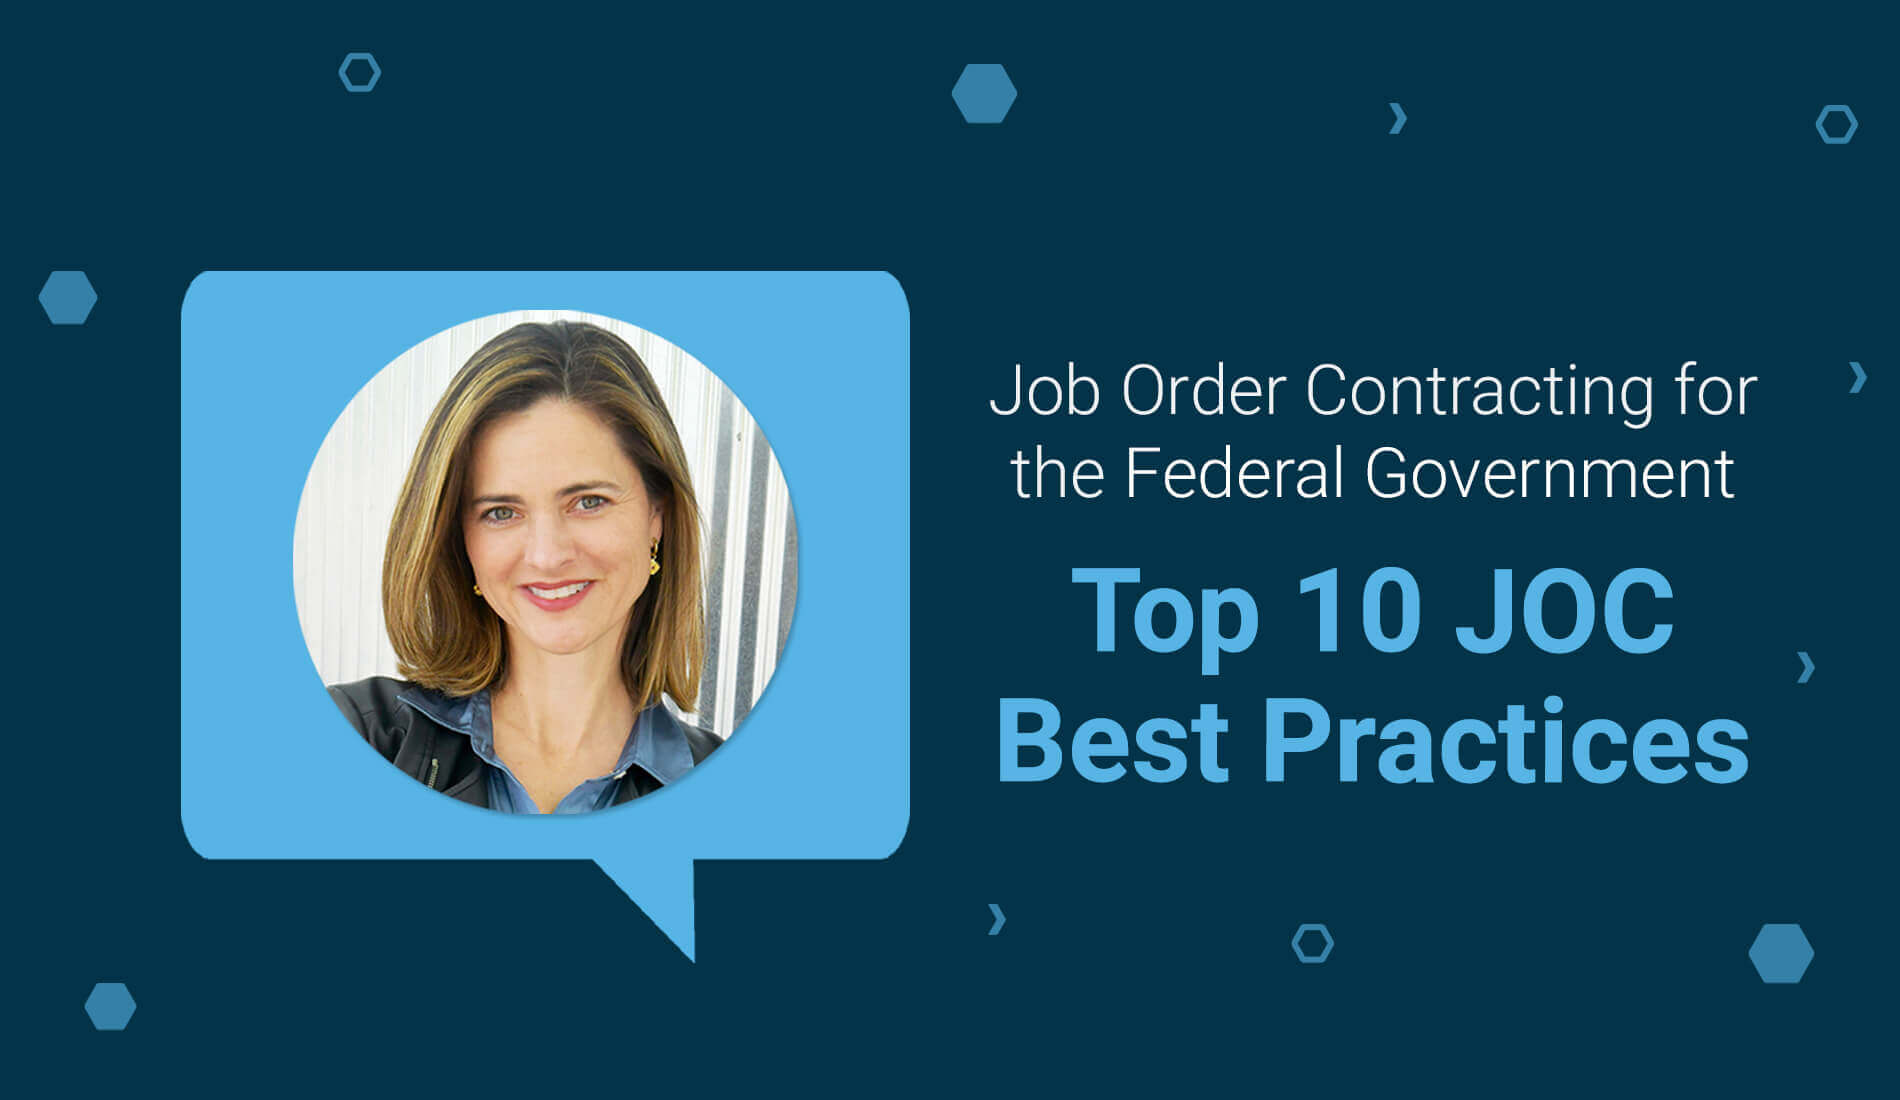 Top 10 JOC Best Practices for the Federal Space 1